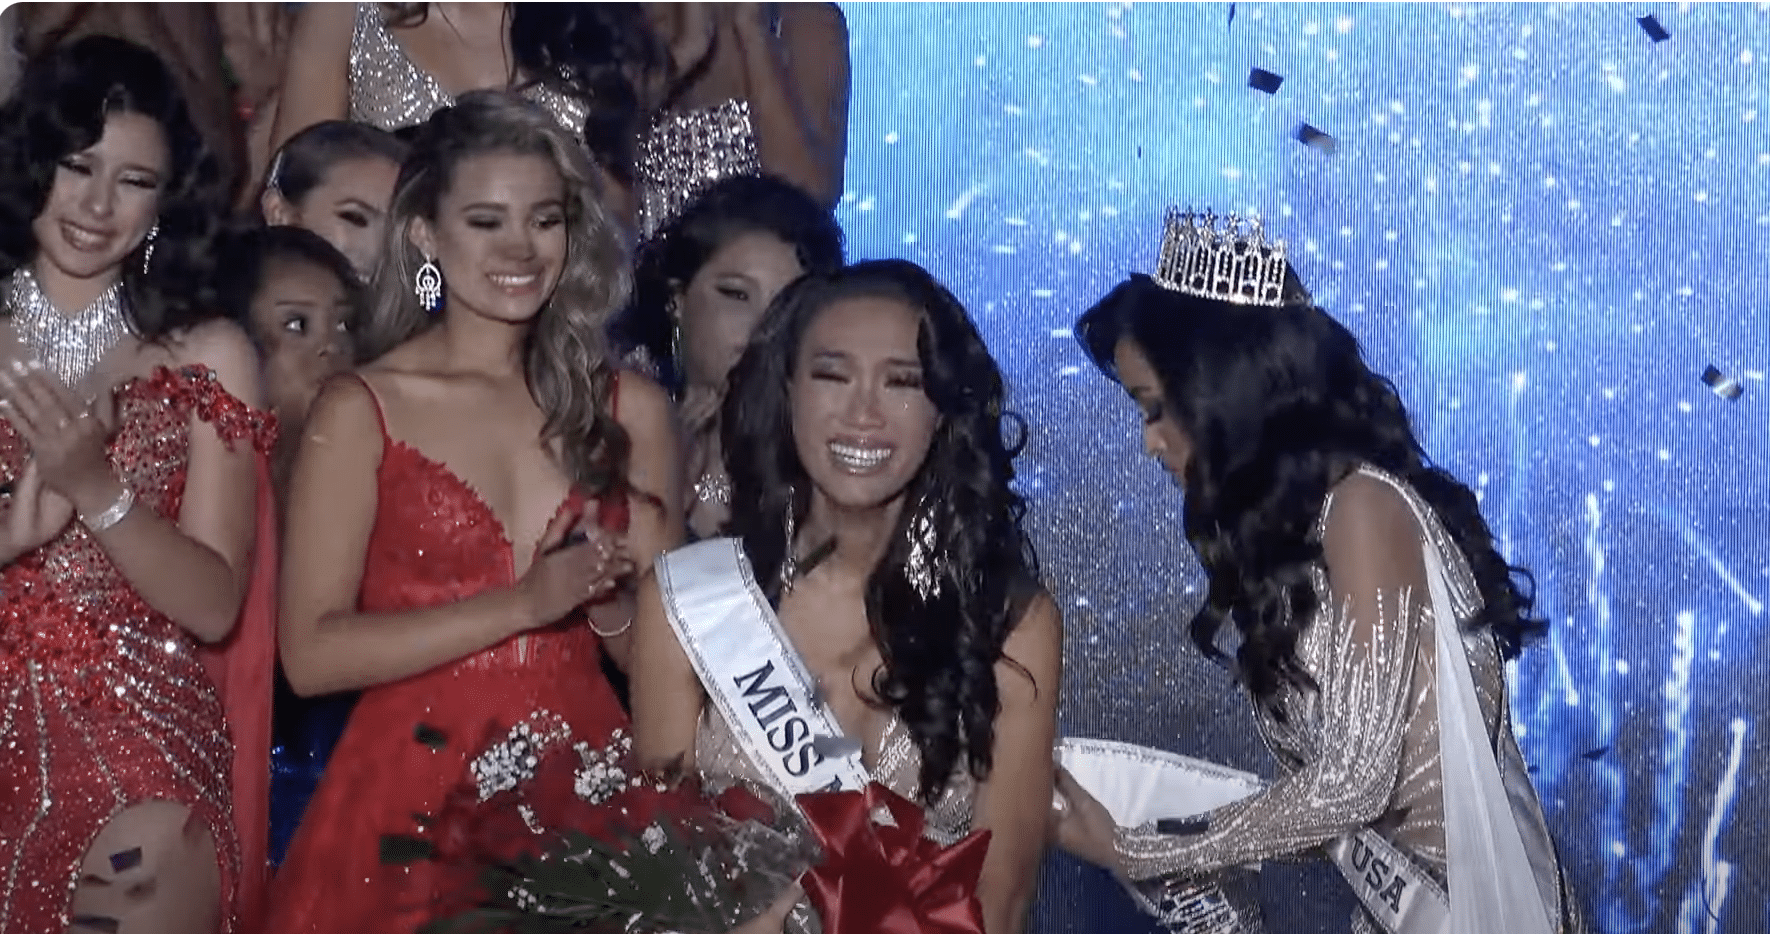 Transgender becomes first to win Miss Maryland USA: ‘I knew it was going to mean a lot for all the LGBTQ kids’